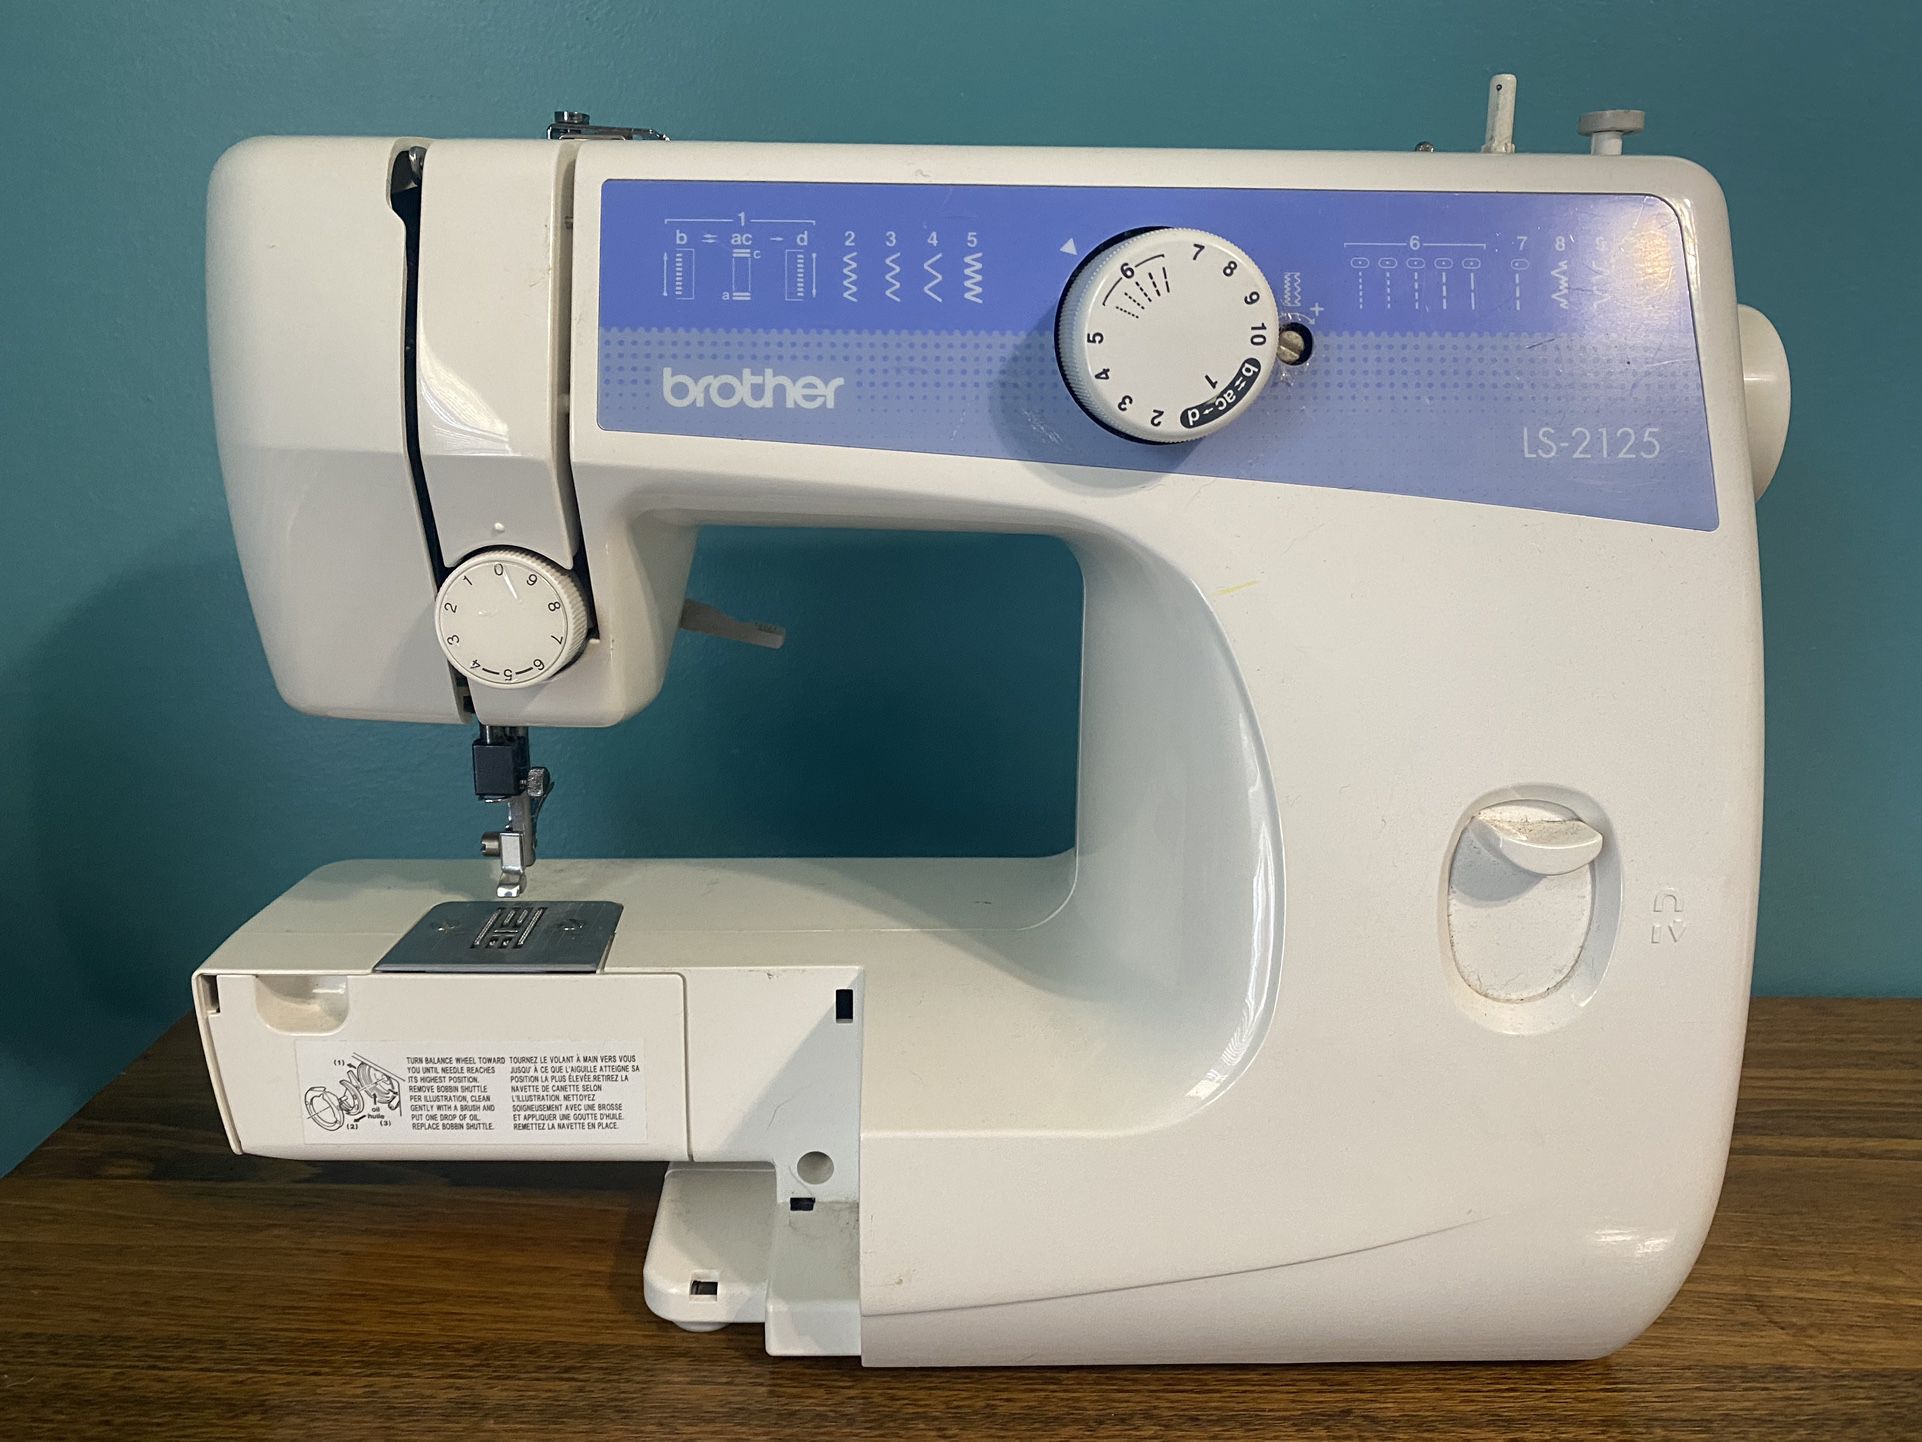 Sewing Machine - Brand: Brothers